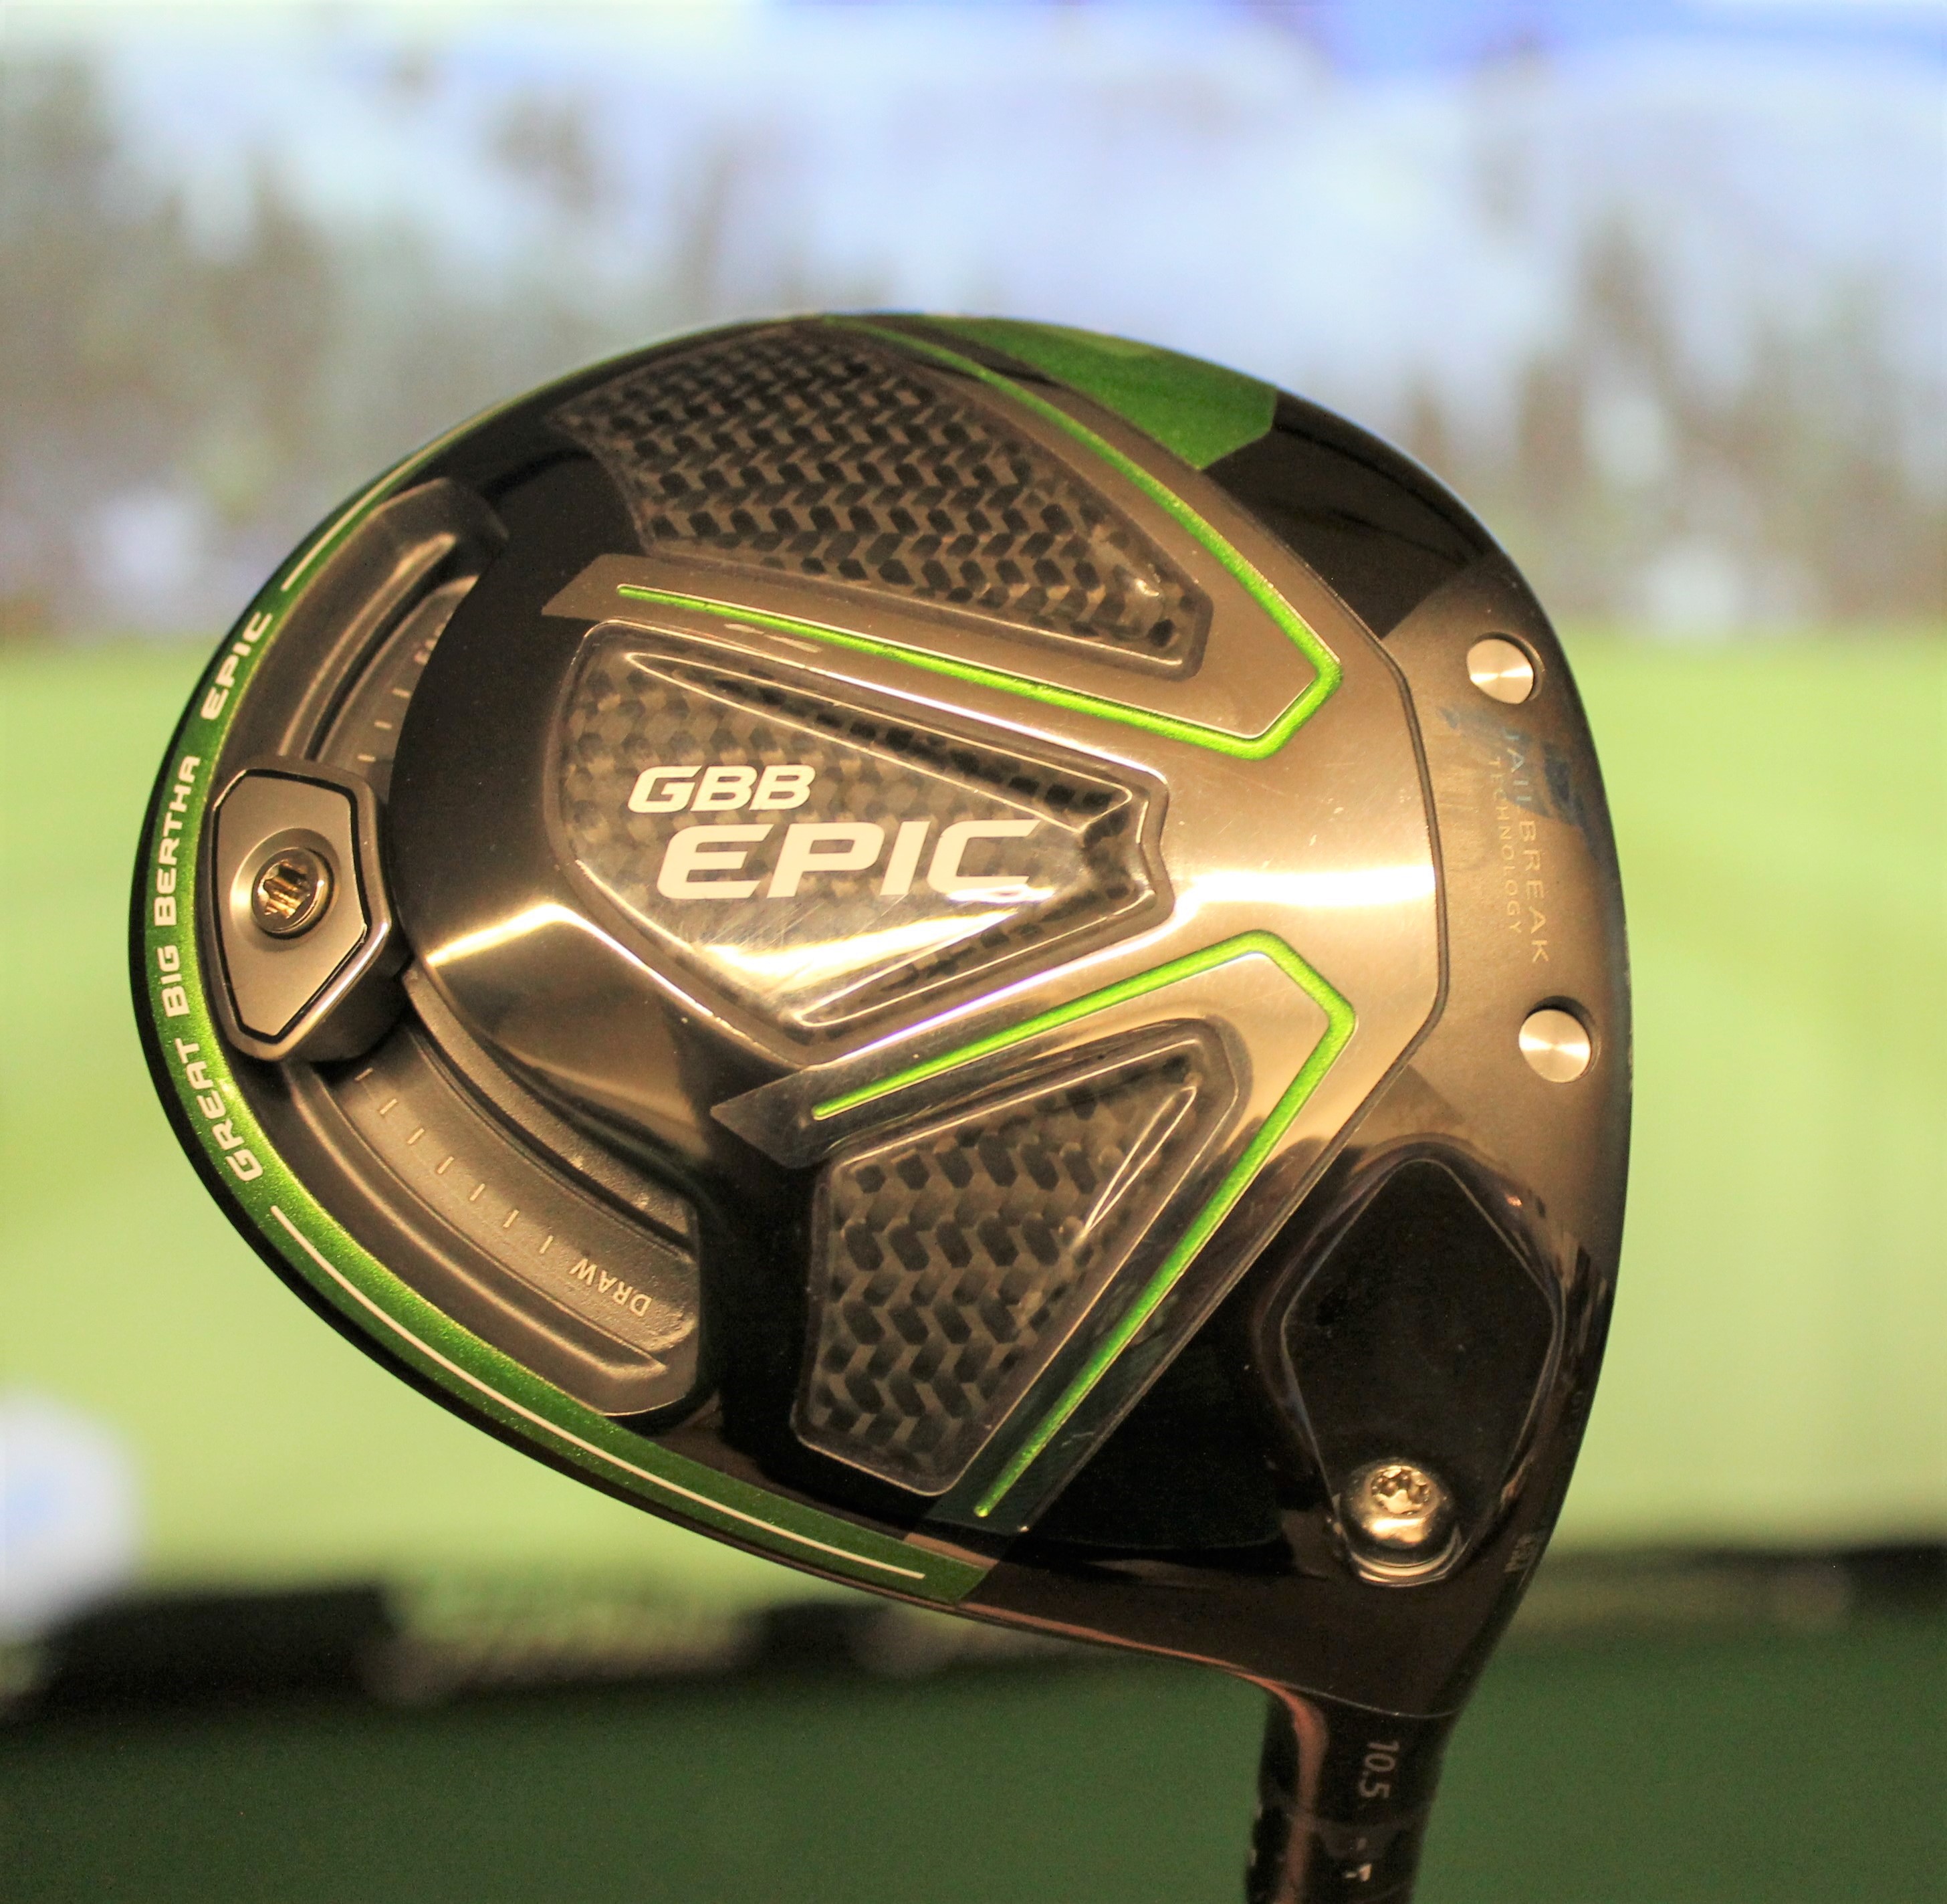 Callaway Golf Gbb Epic Epic Subzero Driver Fairway Woods Preview Photos Specs Release Date